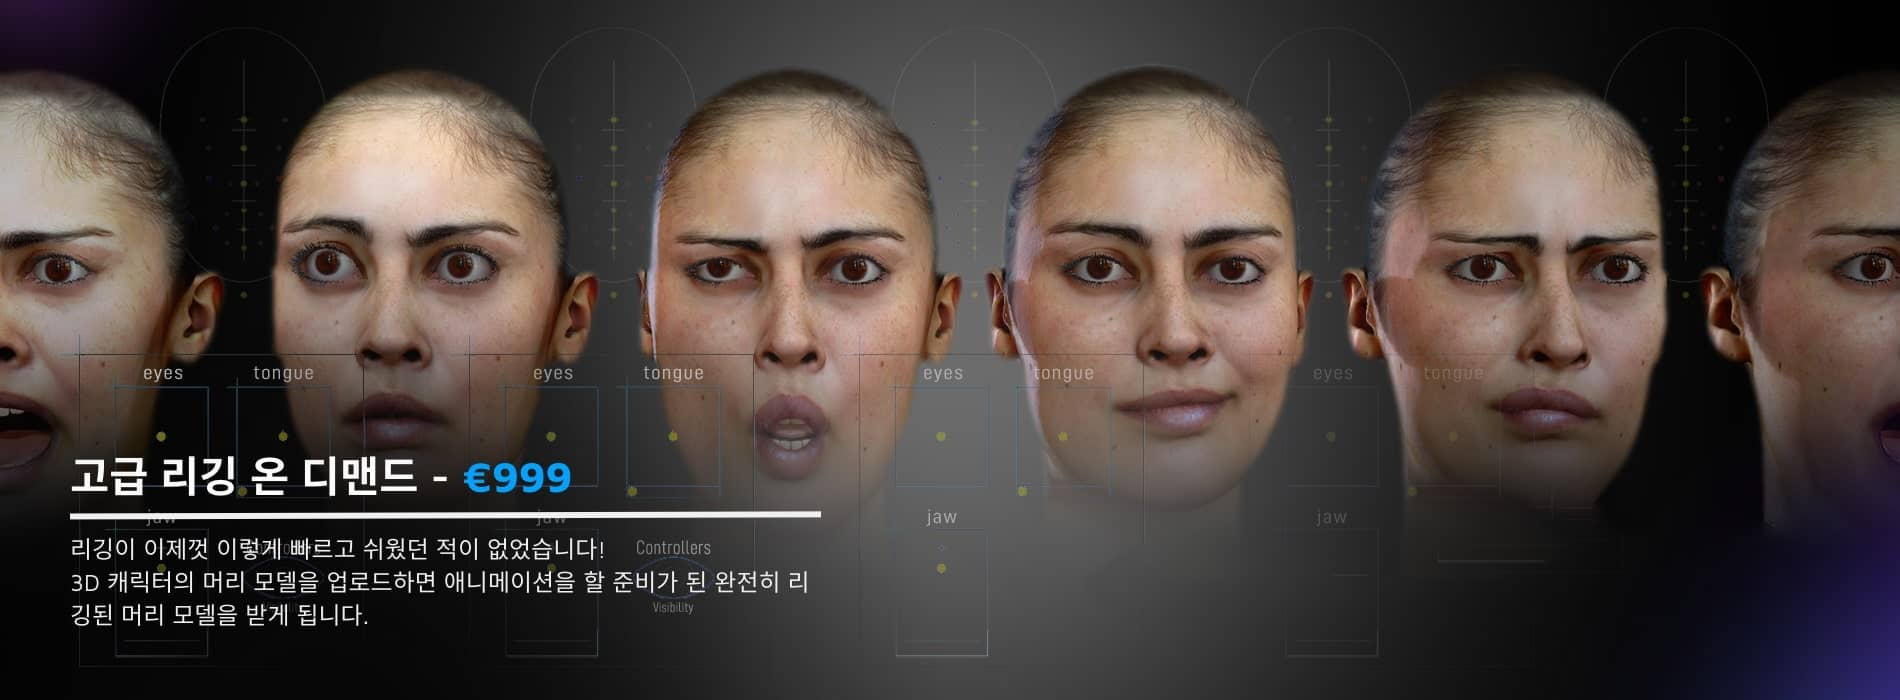 3D model of a girl making different expressions through blendshapes thanks to a 3D rig